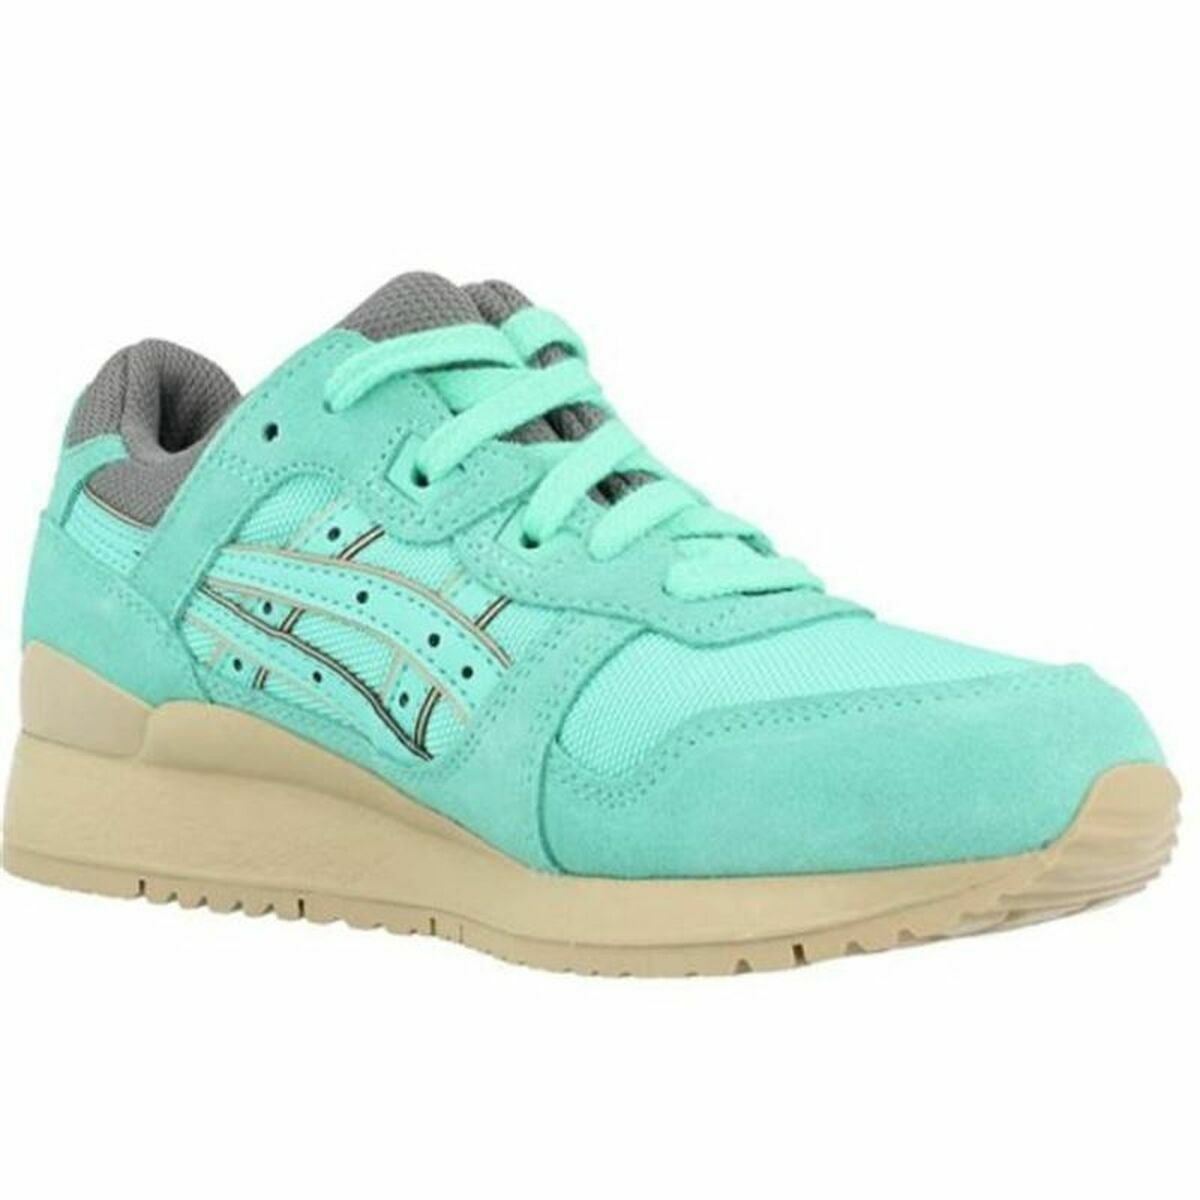 Women's casual trainers Asics Gel-Lyte III Turquoise